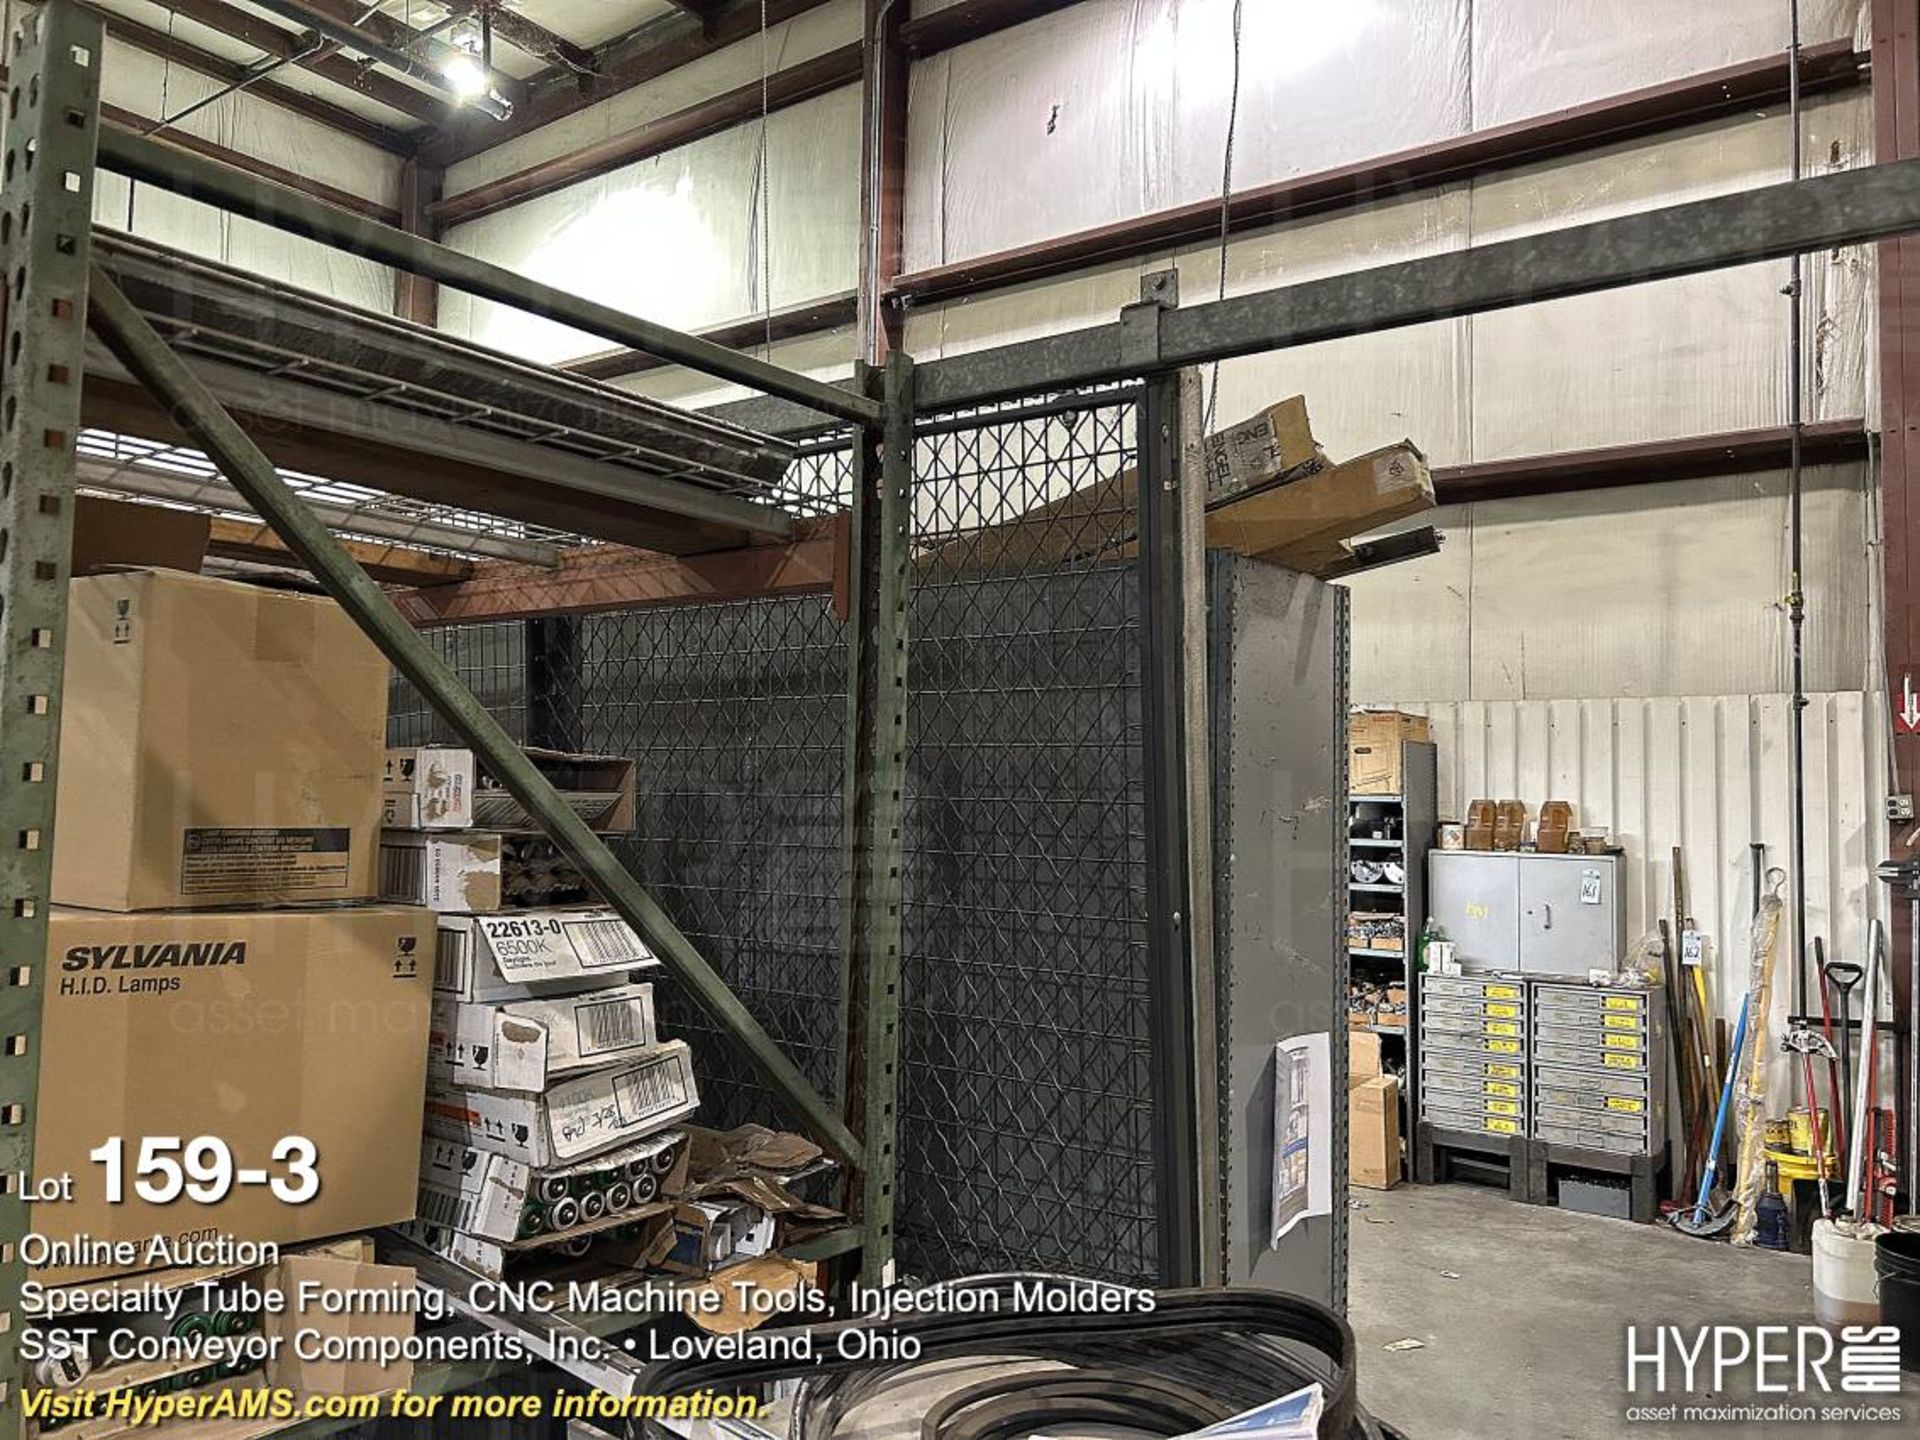 Pallet racking with contents - Image 3 of 5